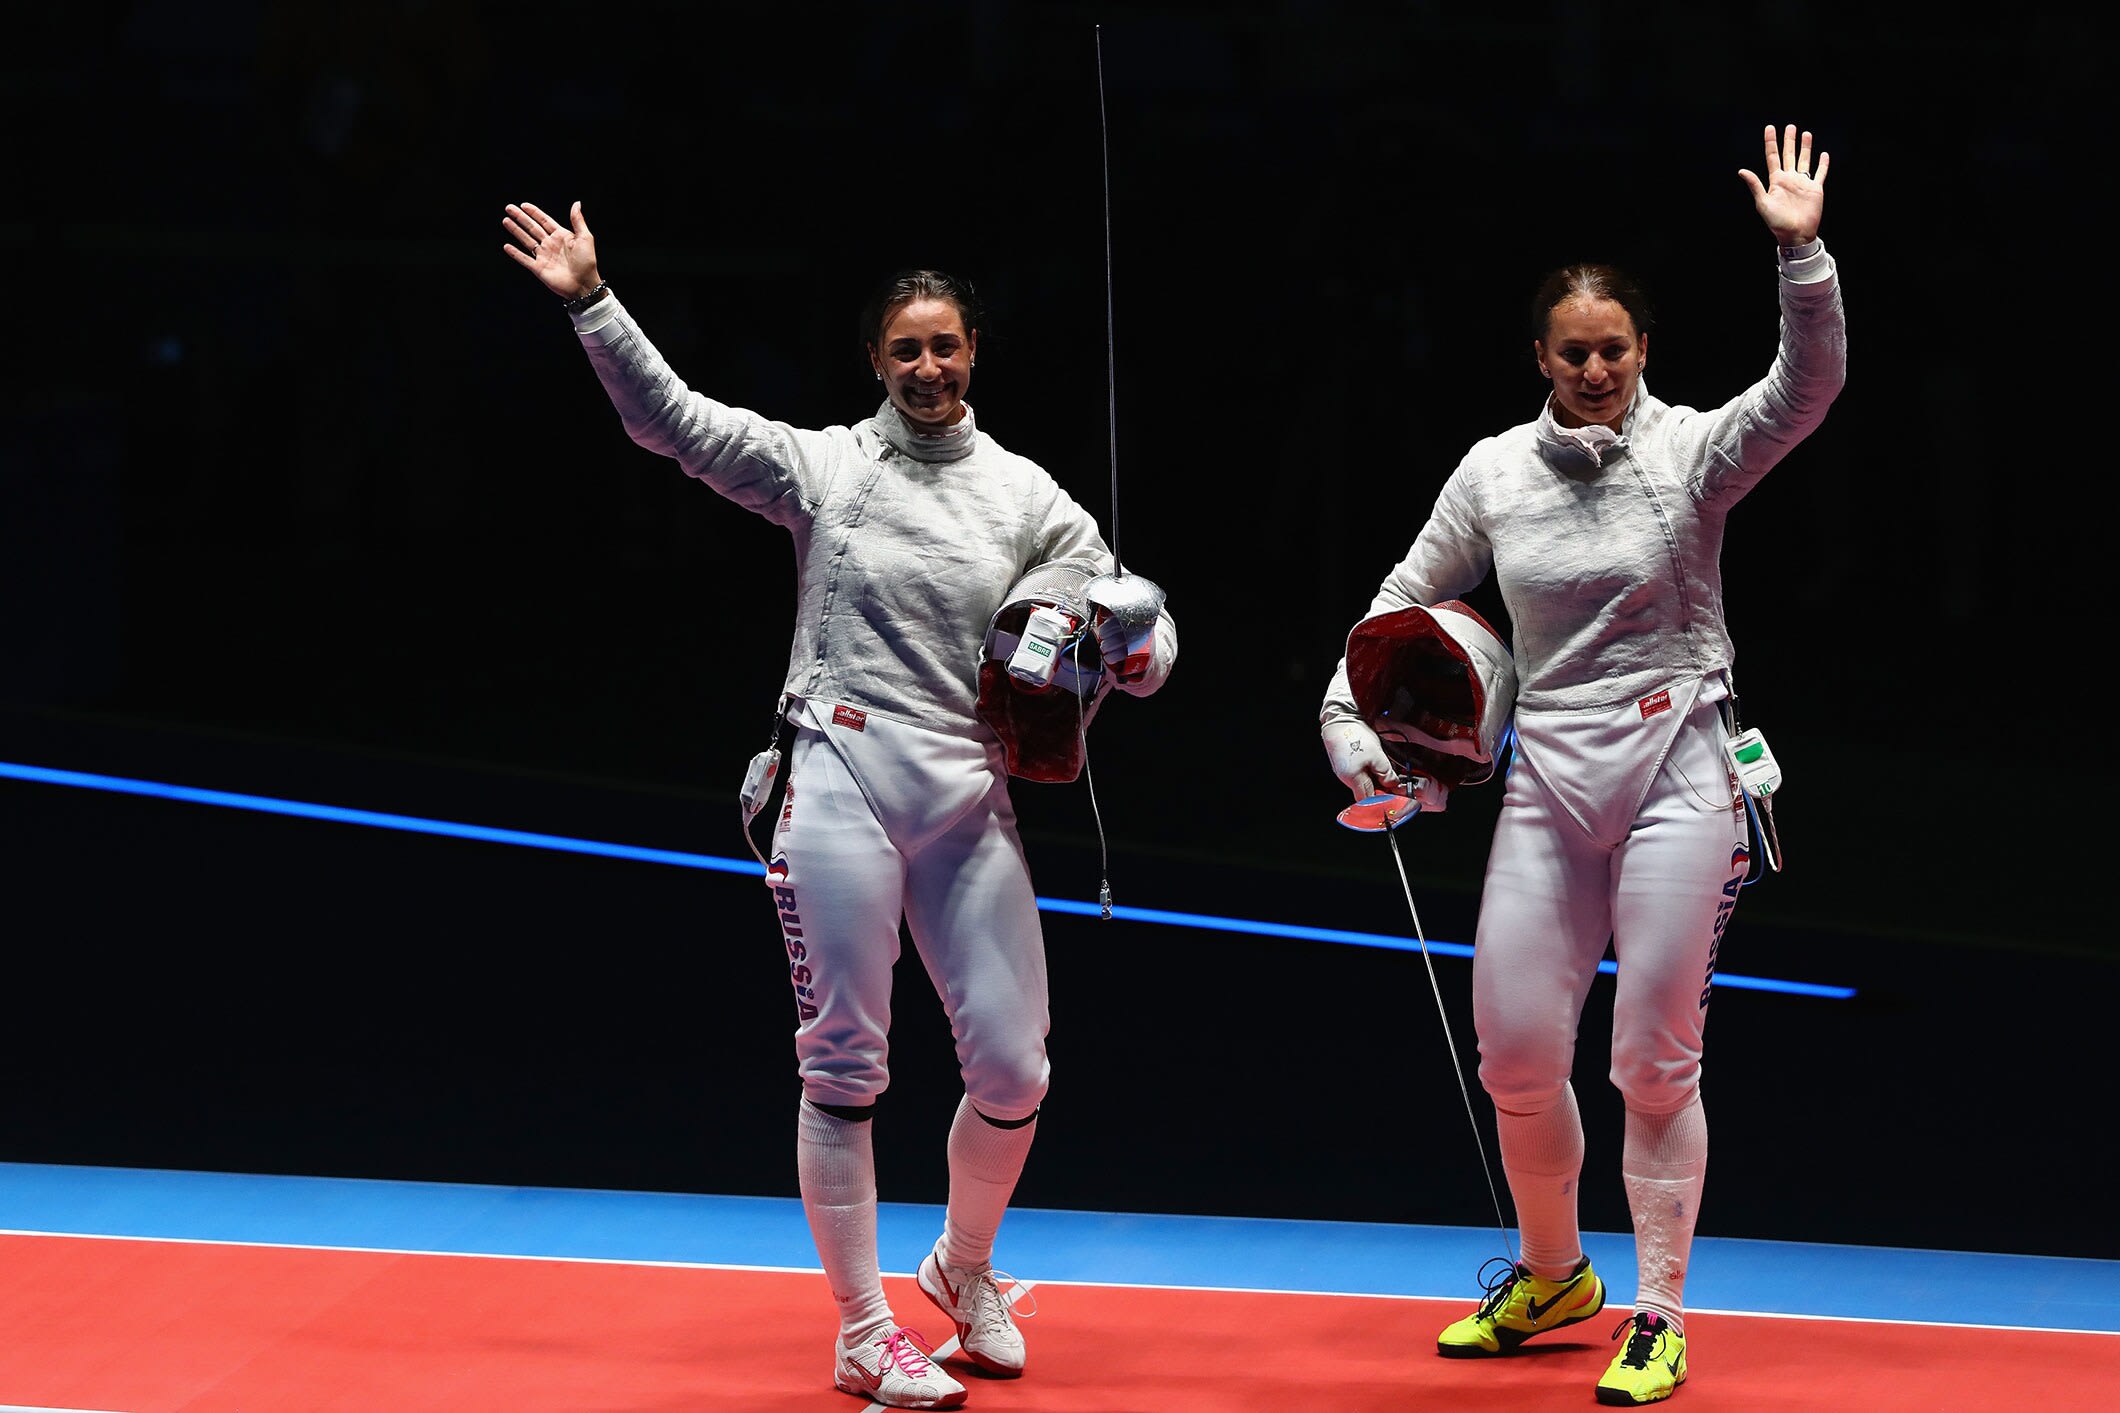 Sofya Velikaya of Russia  and Yana Egorian of Russia look on following the Women's Individual Sabre Gold Medal Bout on Day 3 of the Rio 2016 Olympic Games at Carioca Arena 3 on August 8, 2016 in Rio de Janeiro, Brazil